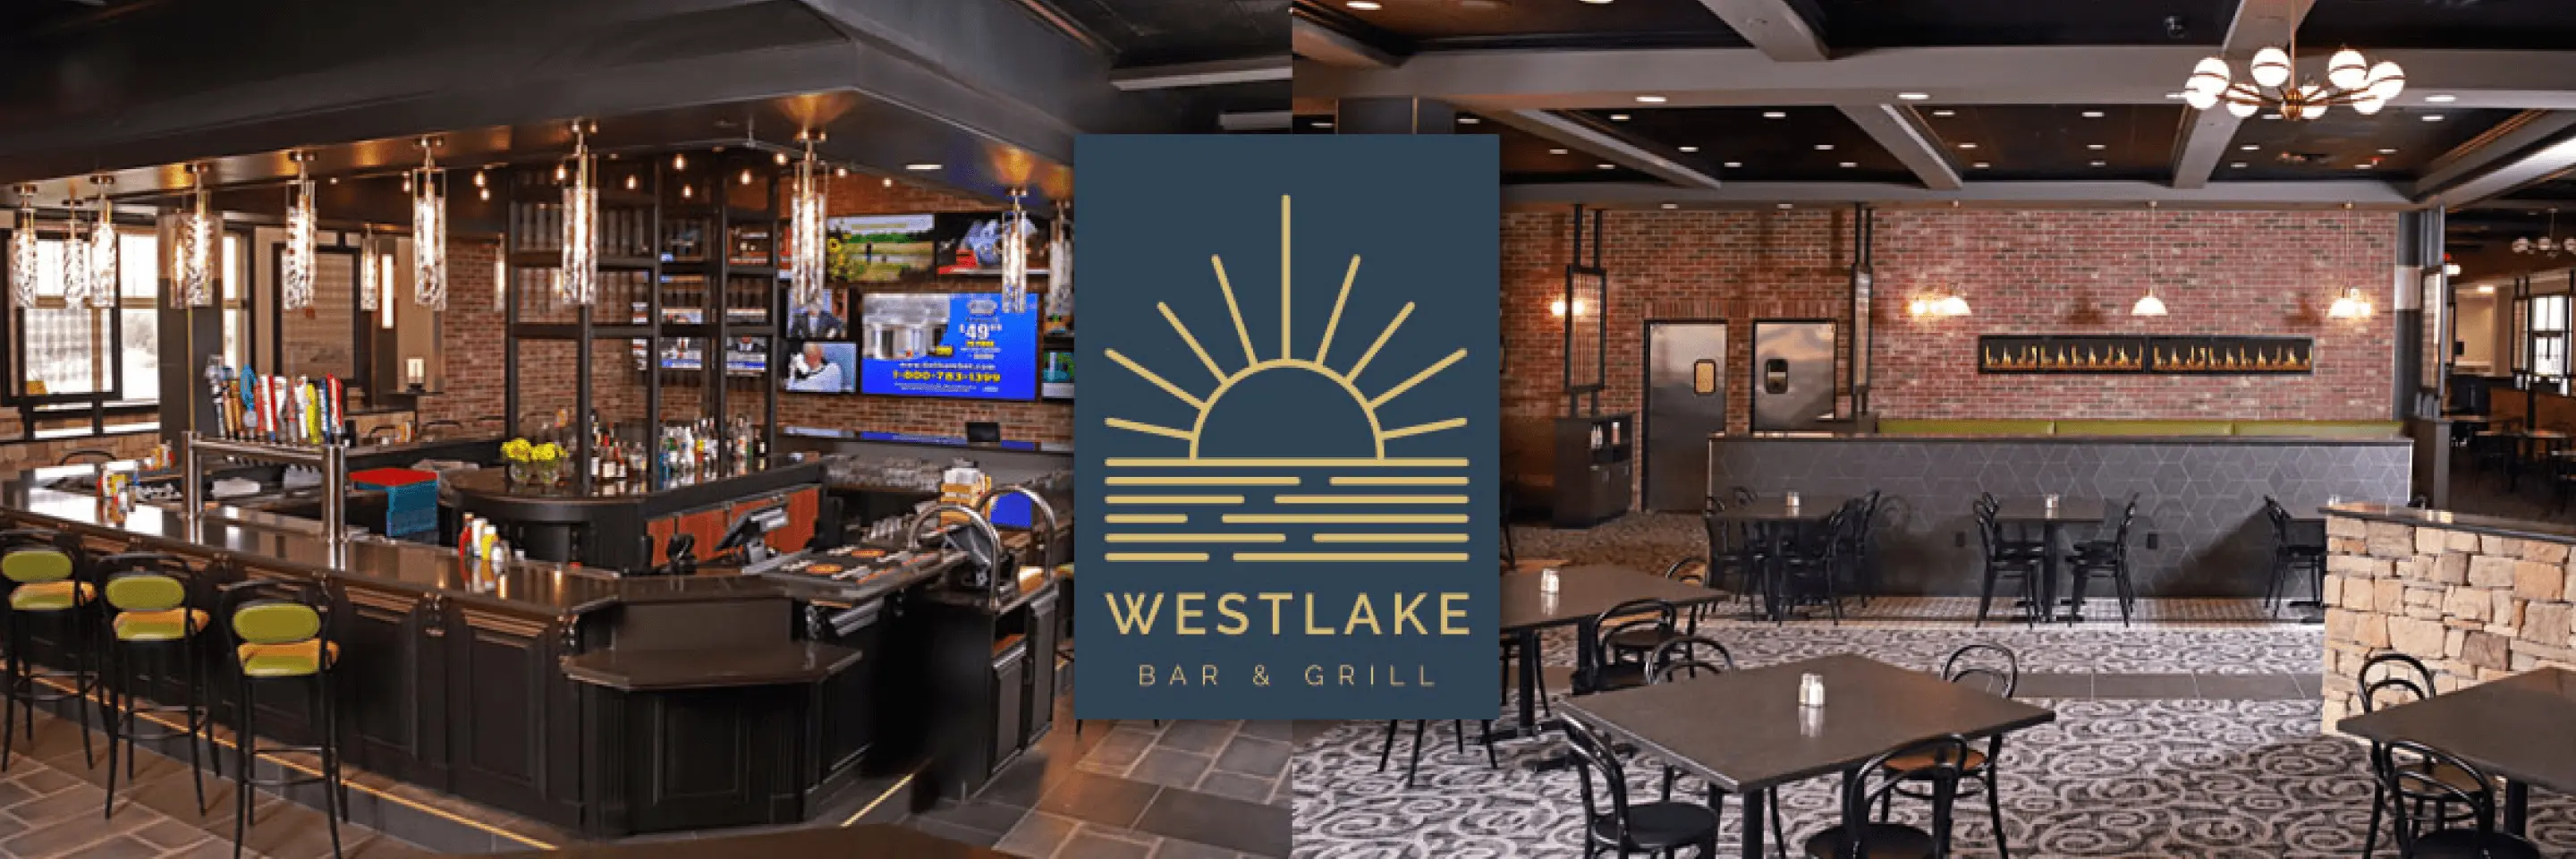 Westlake Bar And Grill Overview